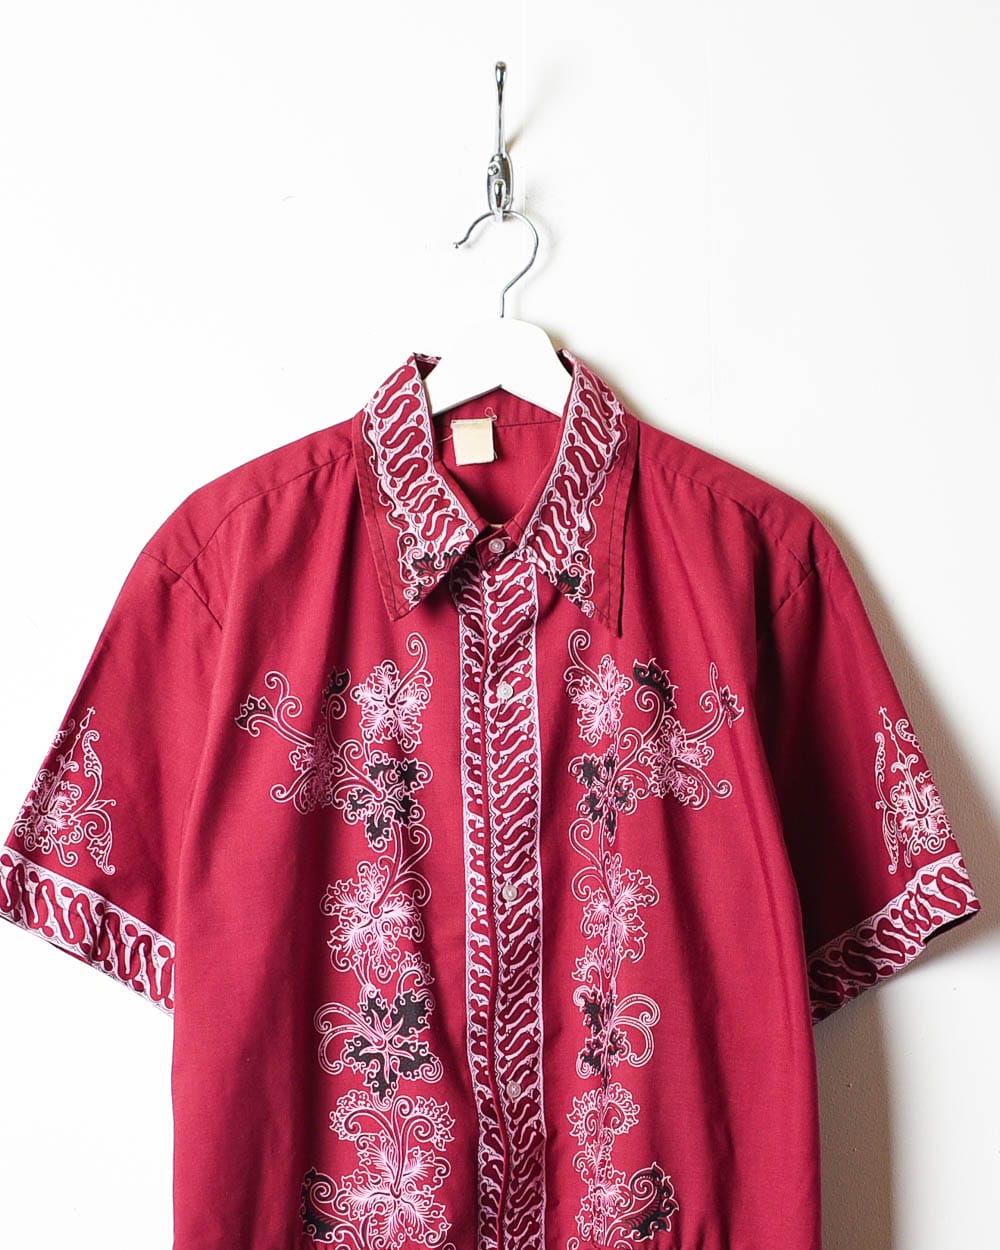 Purple Floral Double Pocket Short Sleeved Shirt - Small